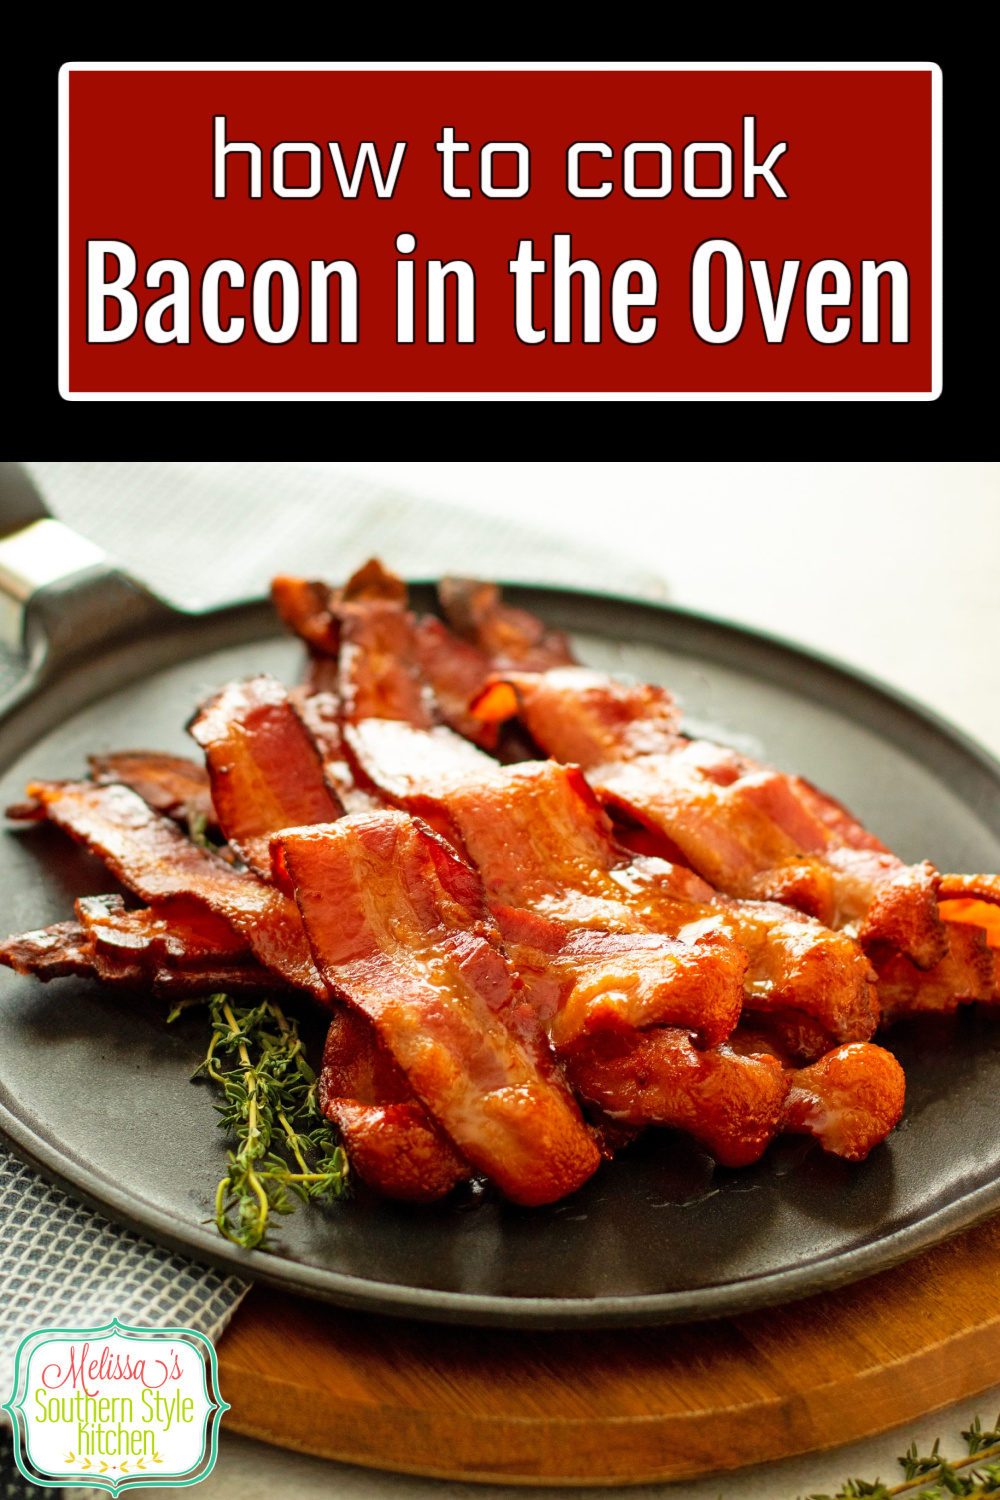 This simple technique showing you How to Cook Bacon in the Oven is one that you'll return to over and over again. #bacon #bakedbacon #howtocookbaconintheoven #ovenfriedbacon #easybaconrecipes #baconrecipes via @melissasssk